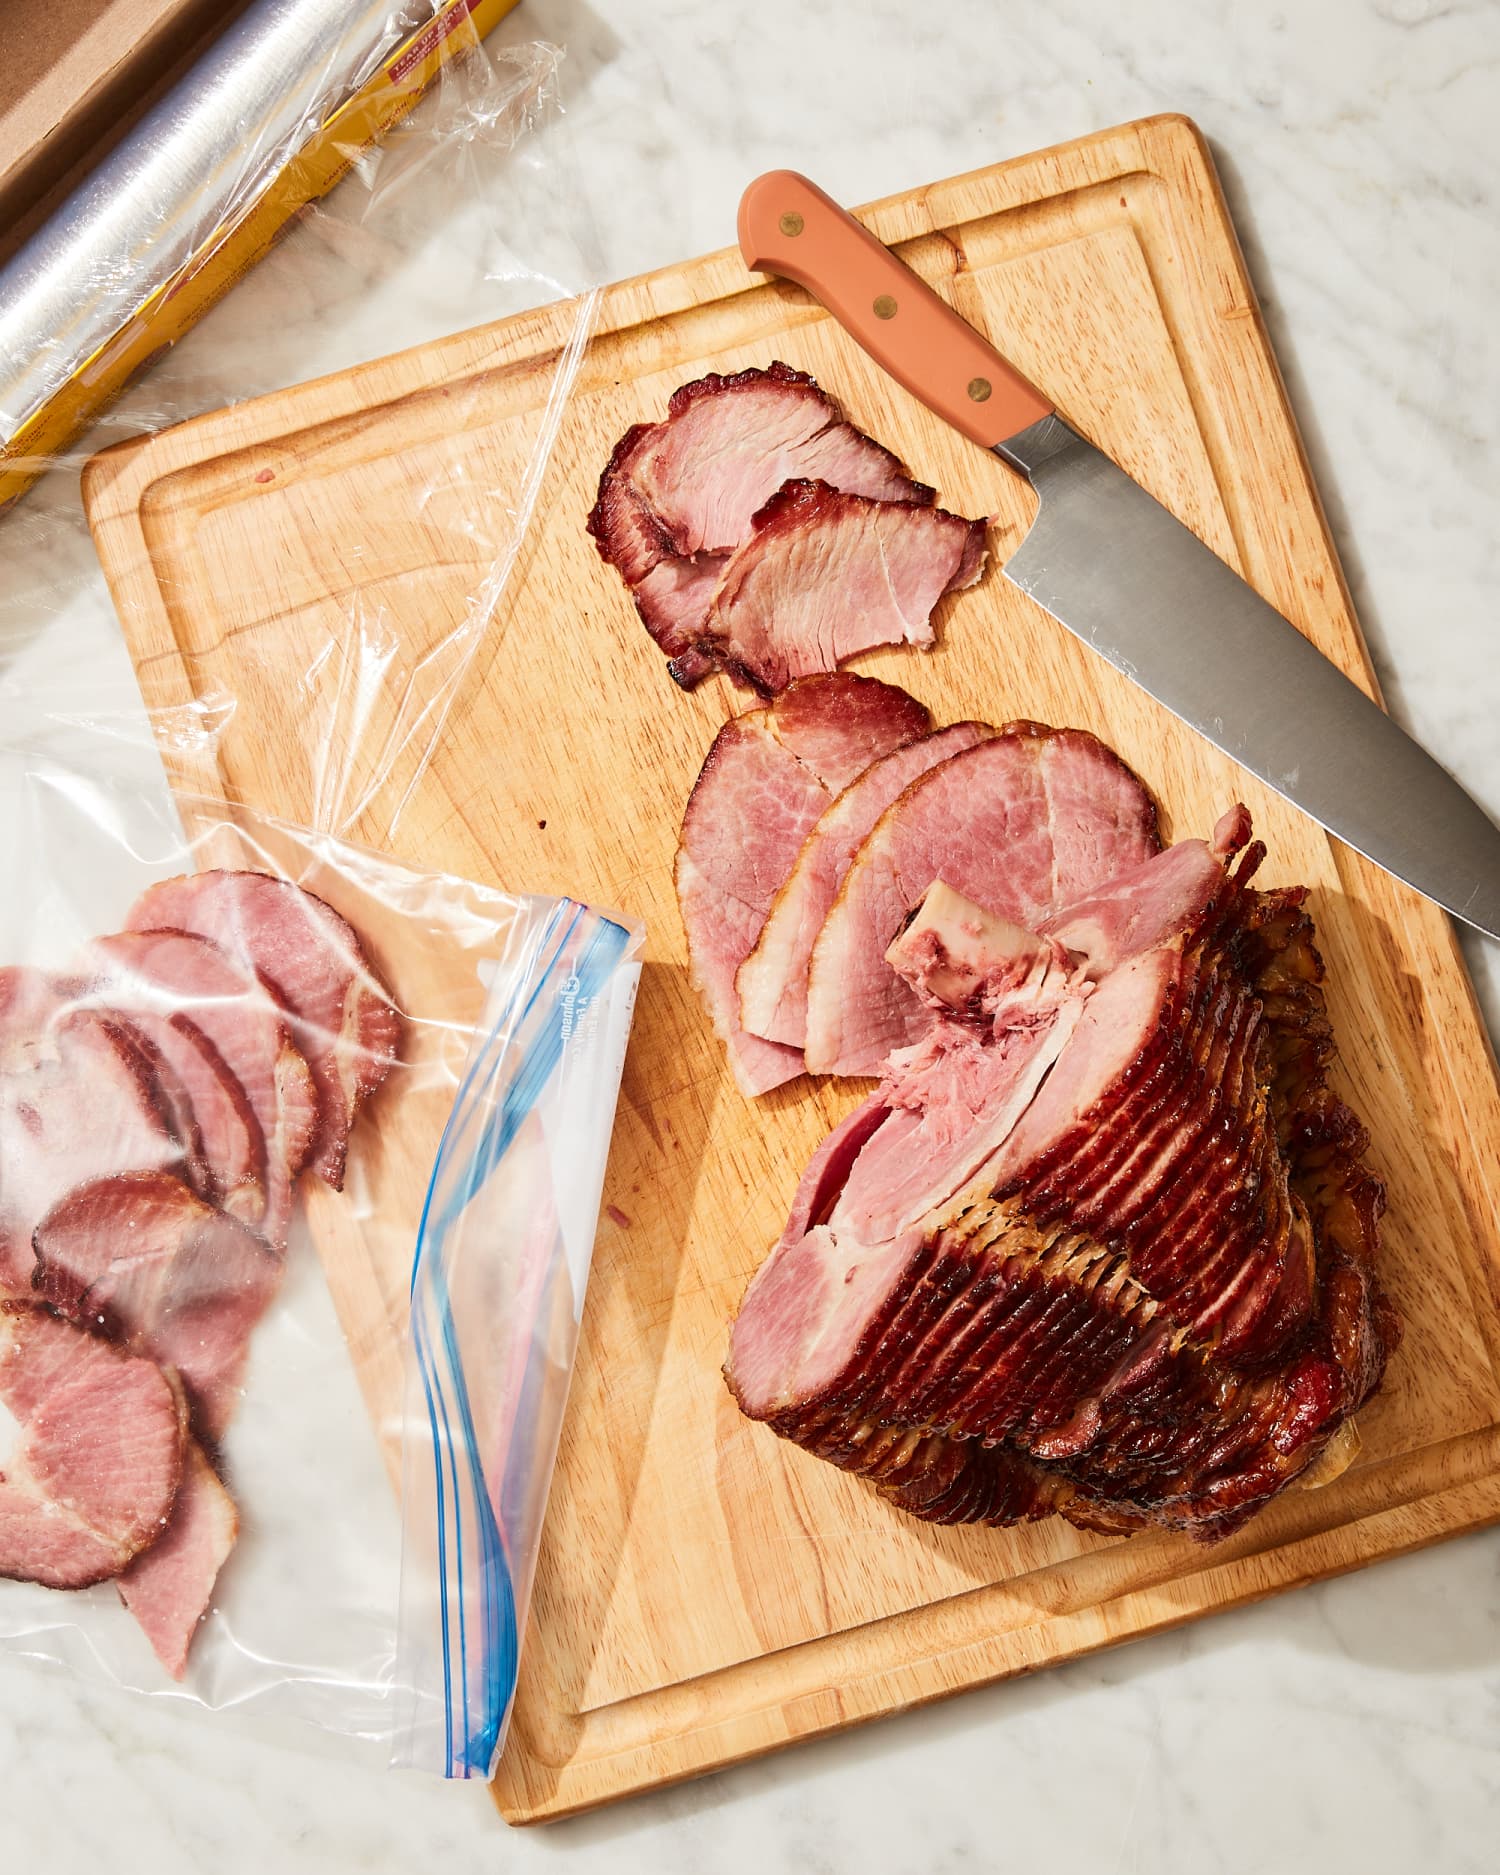 How to Freeze Ham to Make It Last